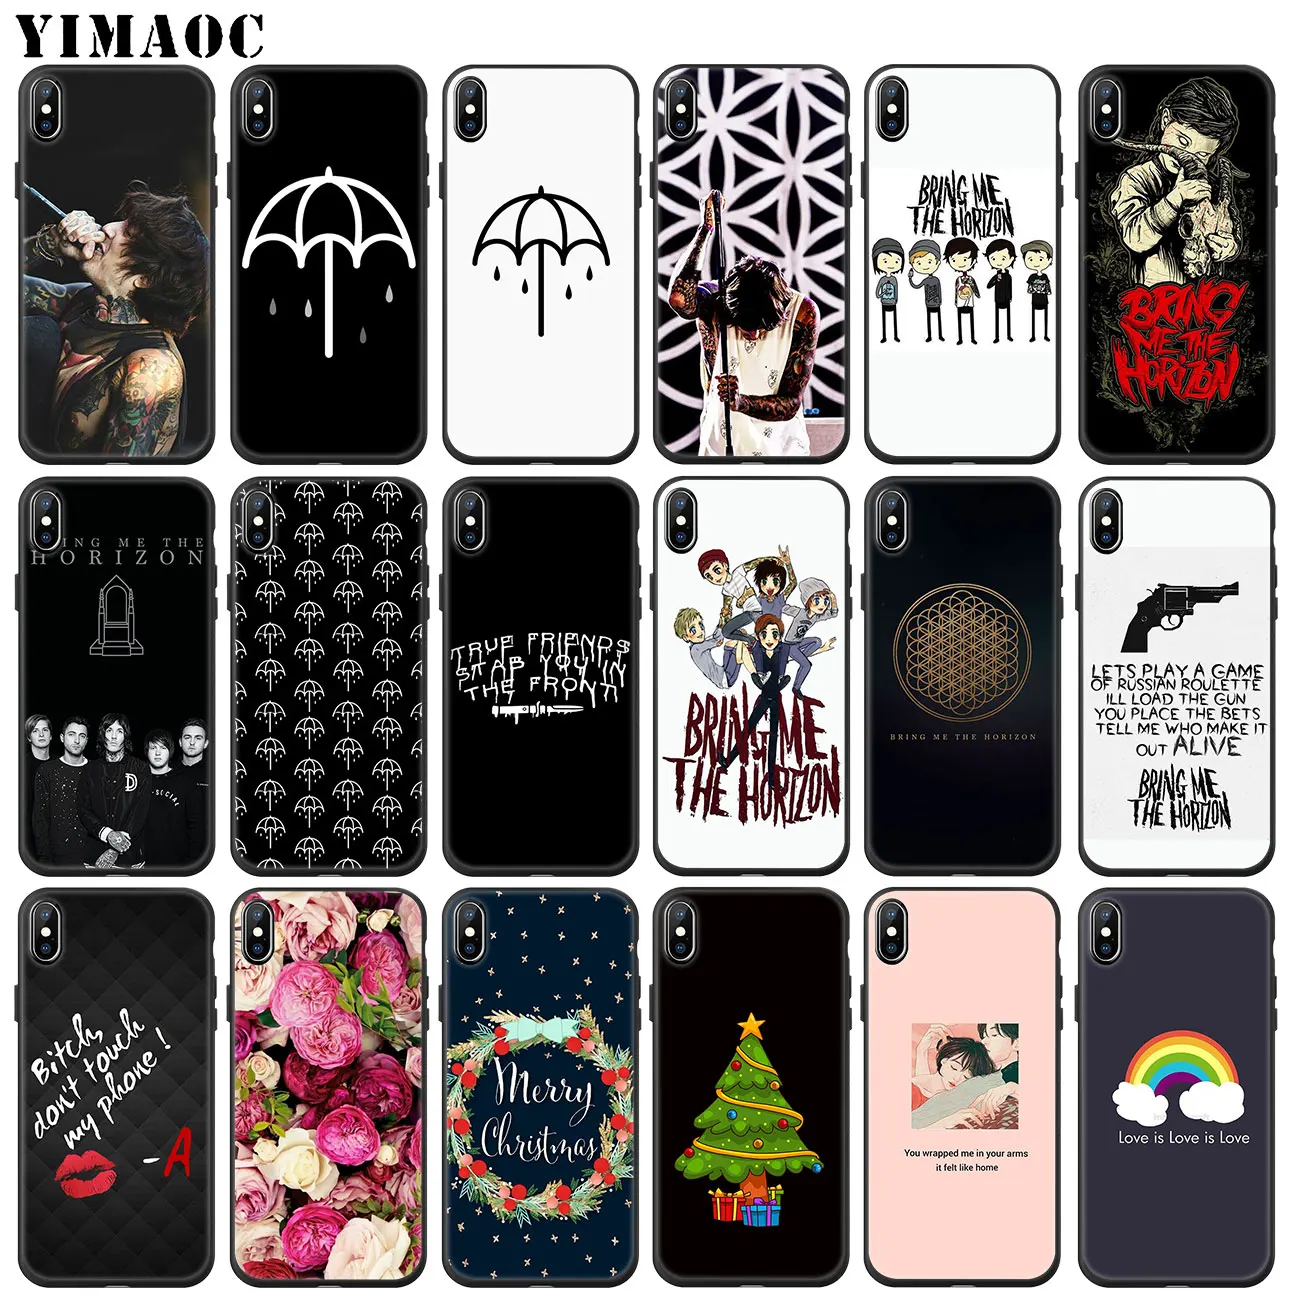 

YIMAOC Oliver Sykes Bring Me the Horizon bmth Soft Silicone Case for iPhone 11 Pro XS Max XR X 6 6S 7 8 Plus 5 5S SE 10 flower